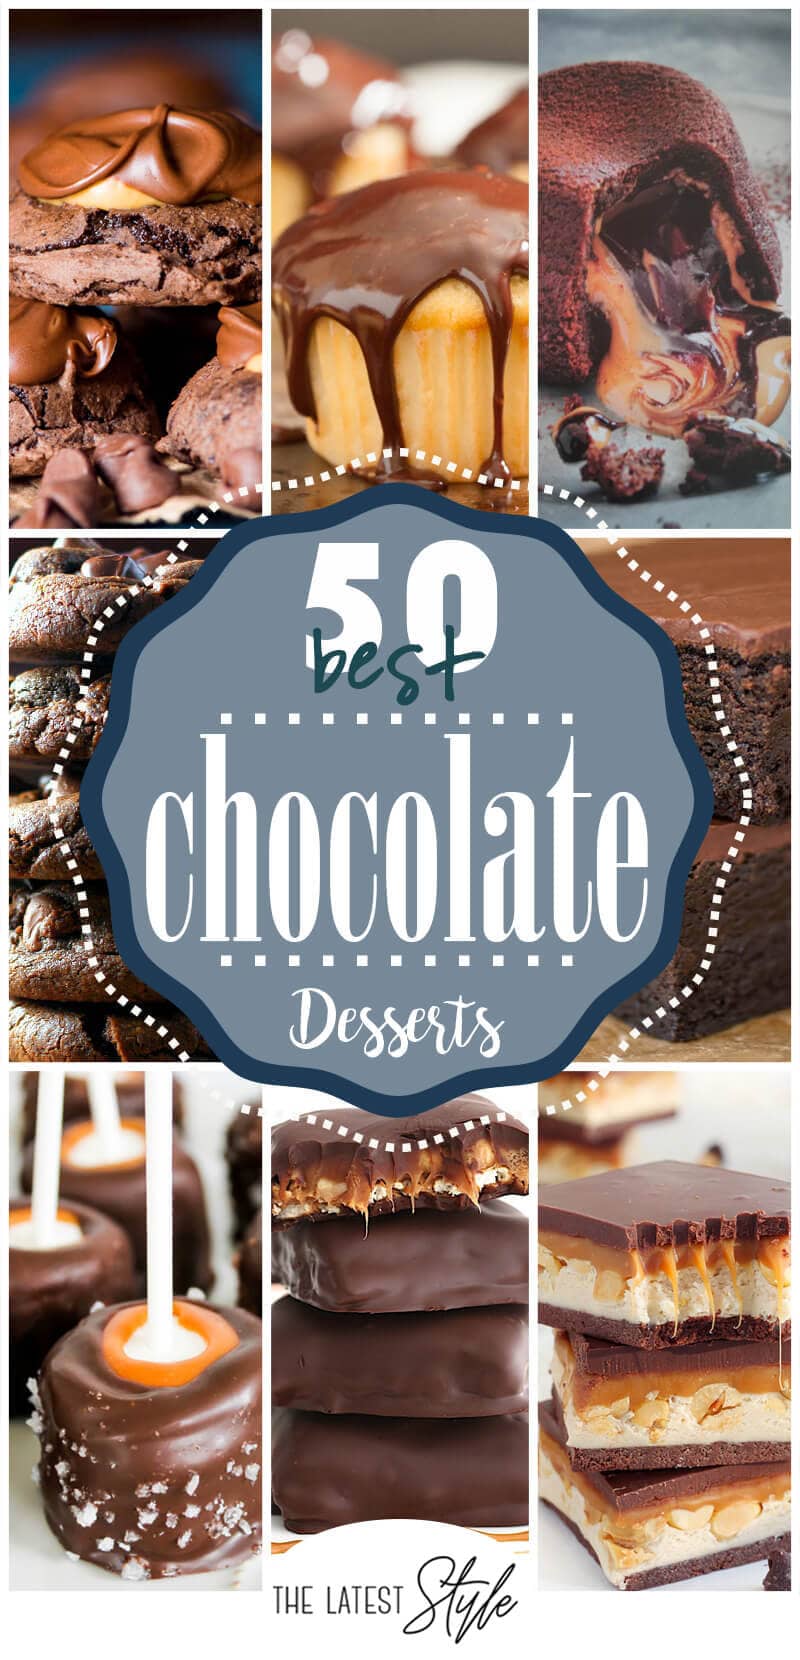 50 Heavenly Chocolate Dessert Recipes that will Become Your New Favorites